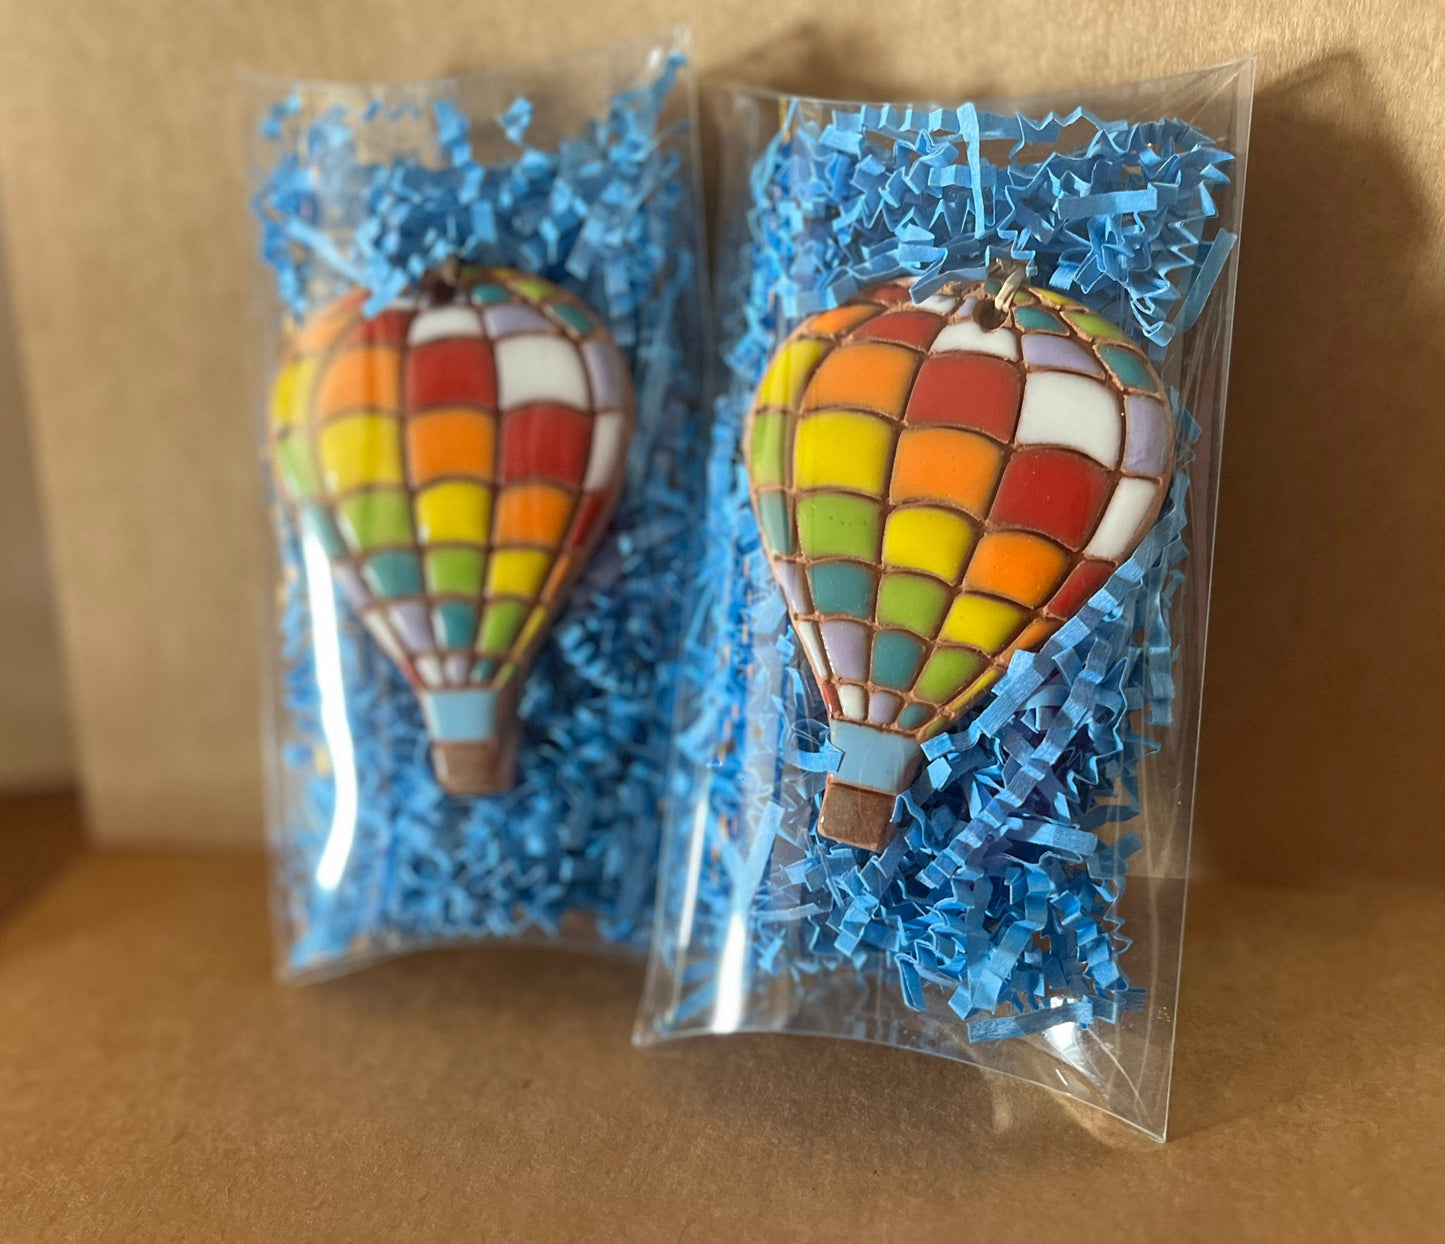 Hearts and Stripes Hot Air Balloon Ornament (color variations)